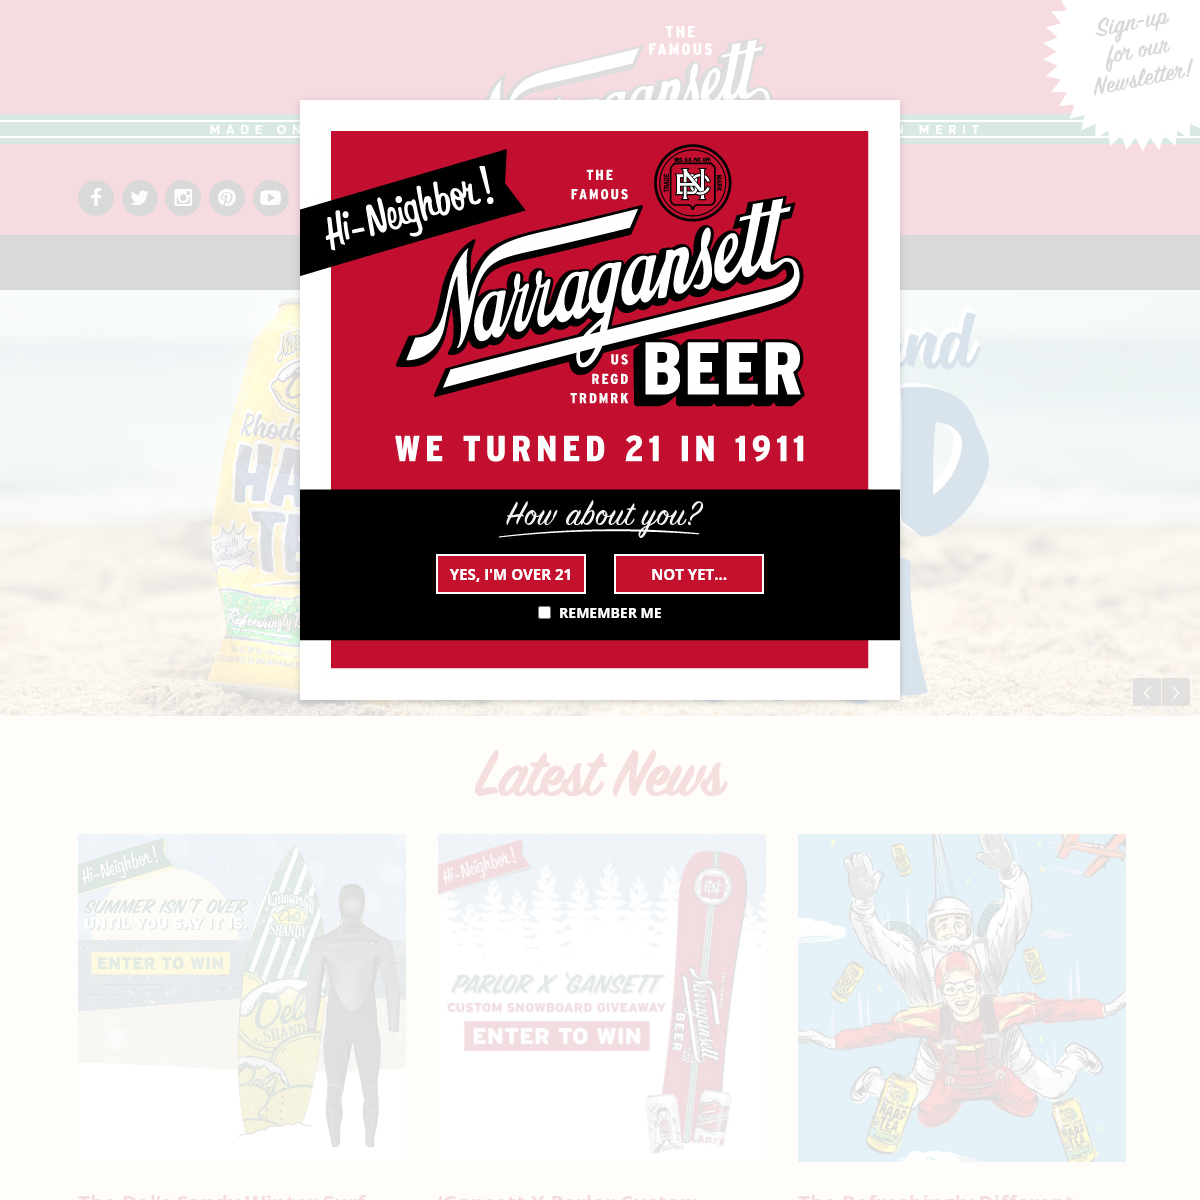 A complete backup of narragansettbeer.com